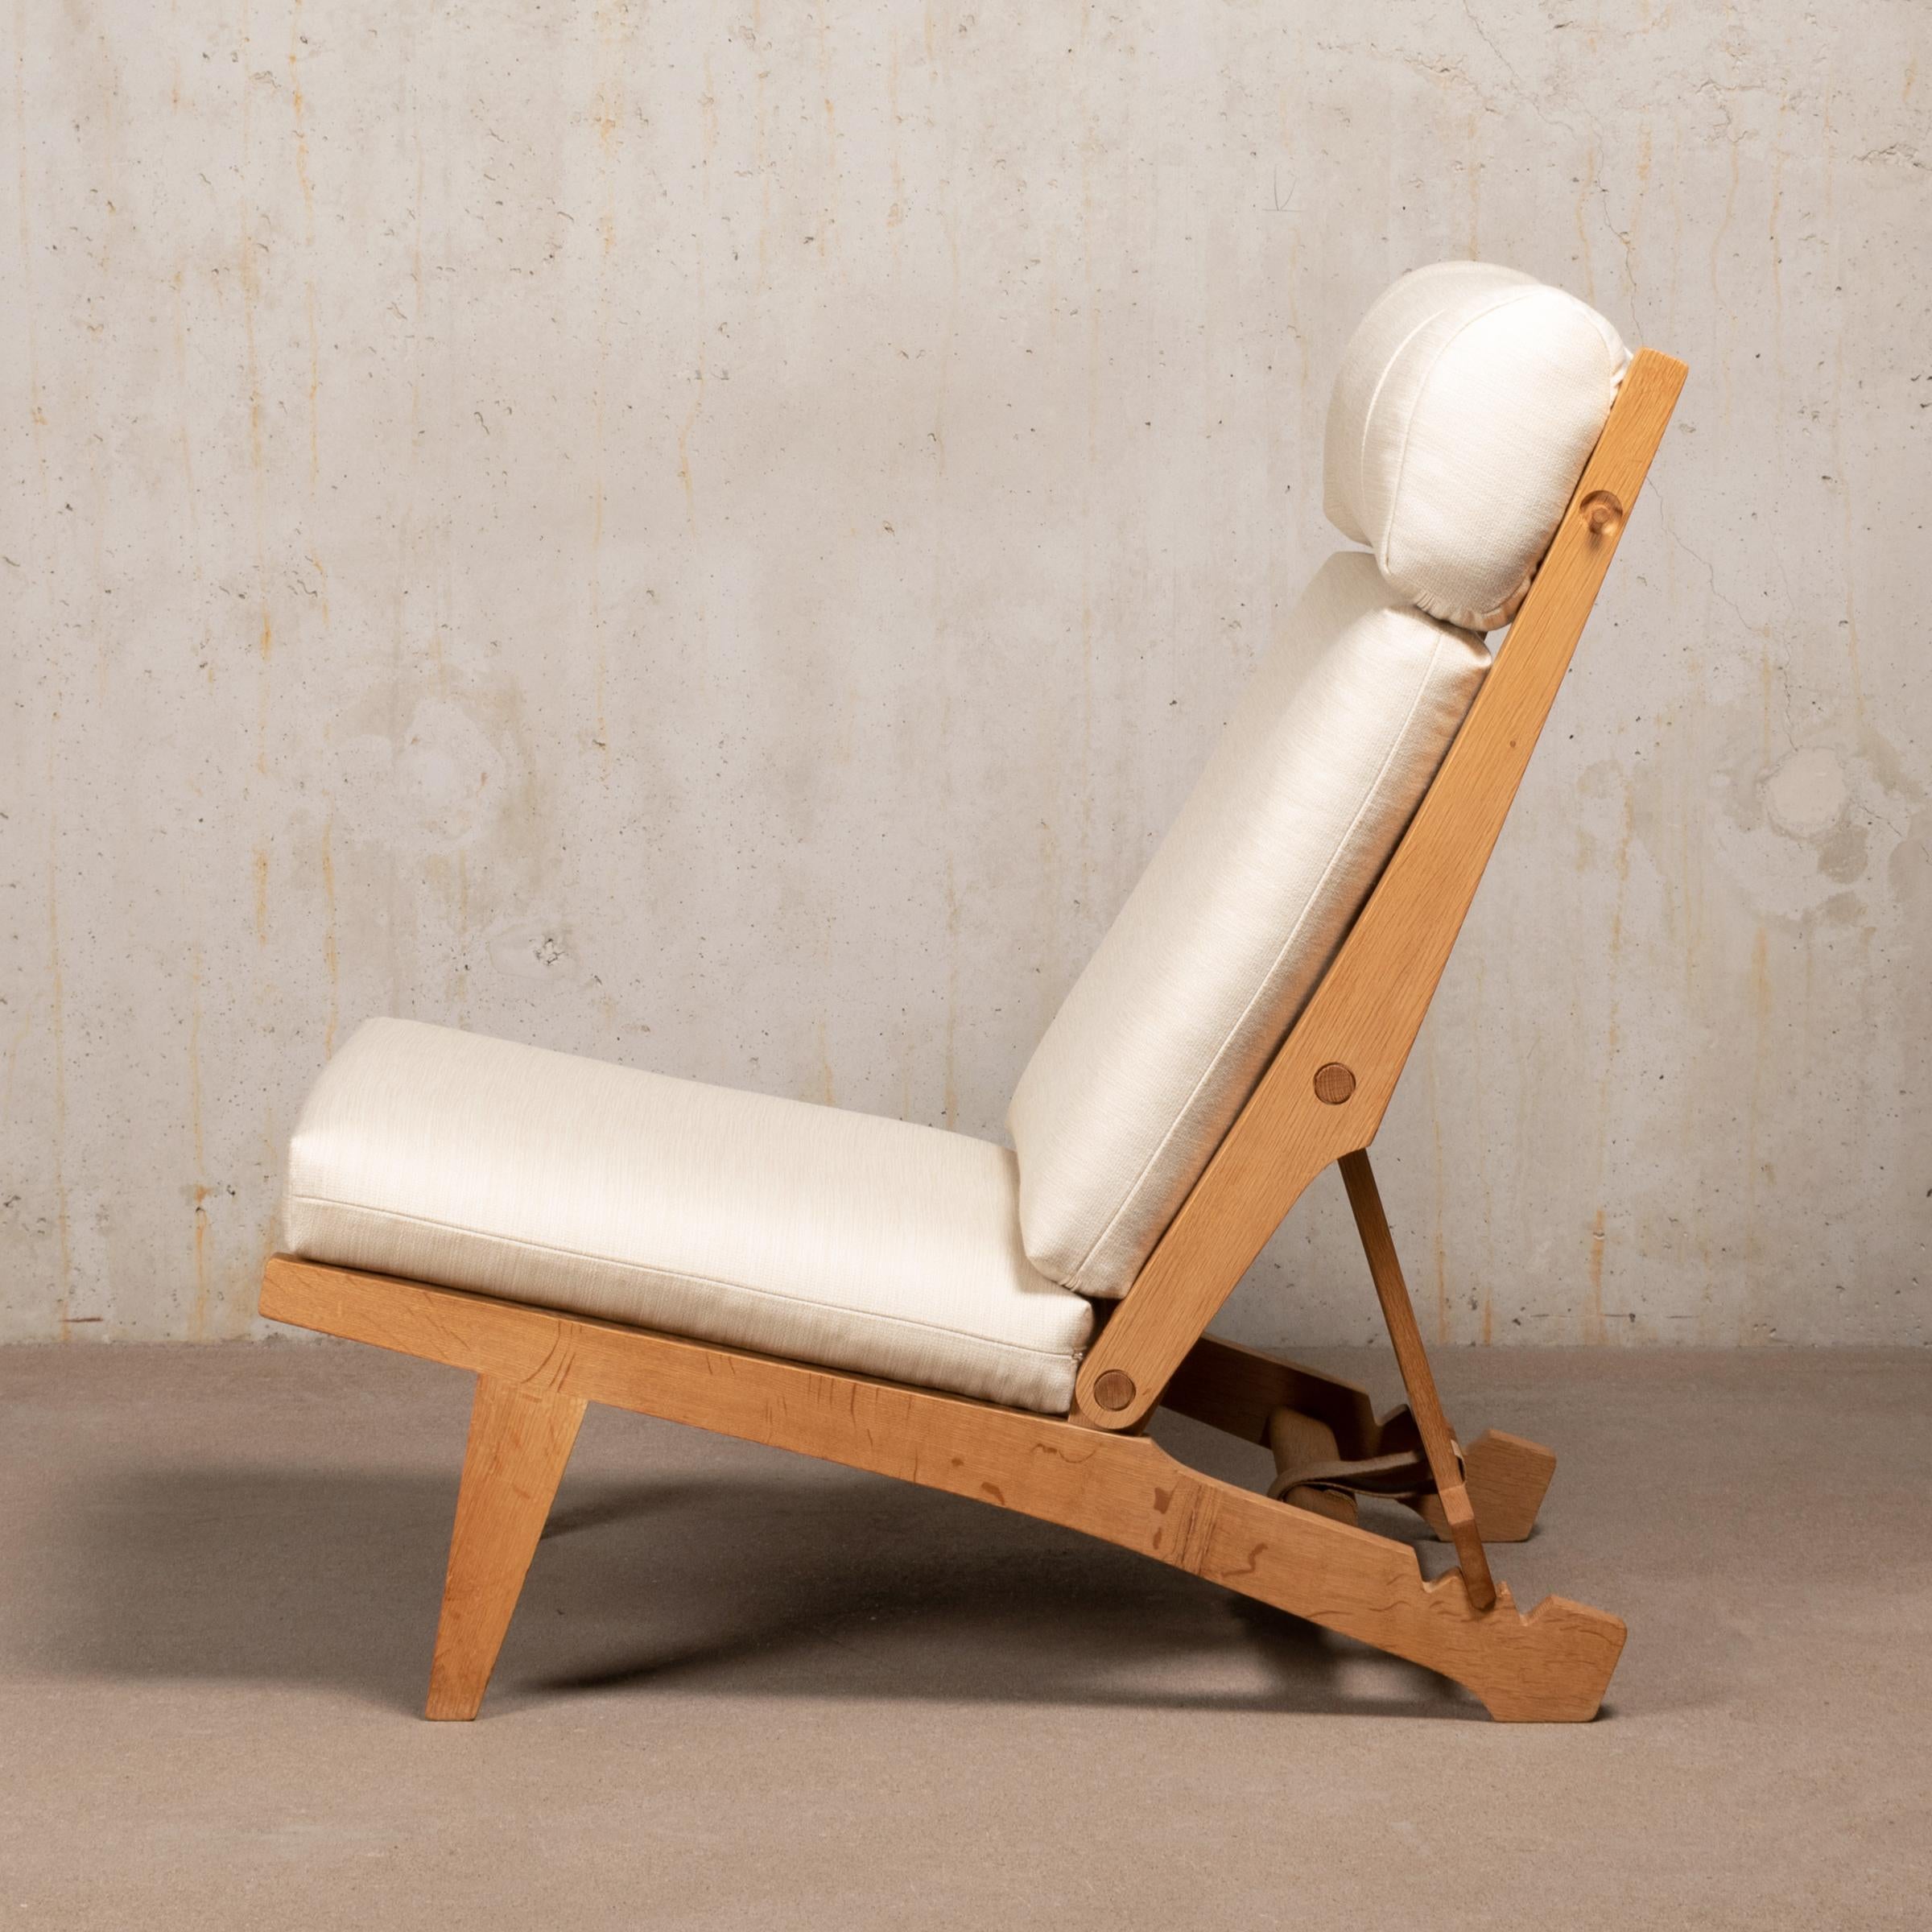 Comfortable Hans Wegner AP71 folding lounge chair designed in 1968 with adjustable back- and headrest in three positions. Solid oak frame with beautiful details. Cushions are reupholstered with Kvadrat Raf Simons Balder wool (0212) with a nice soft